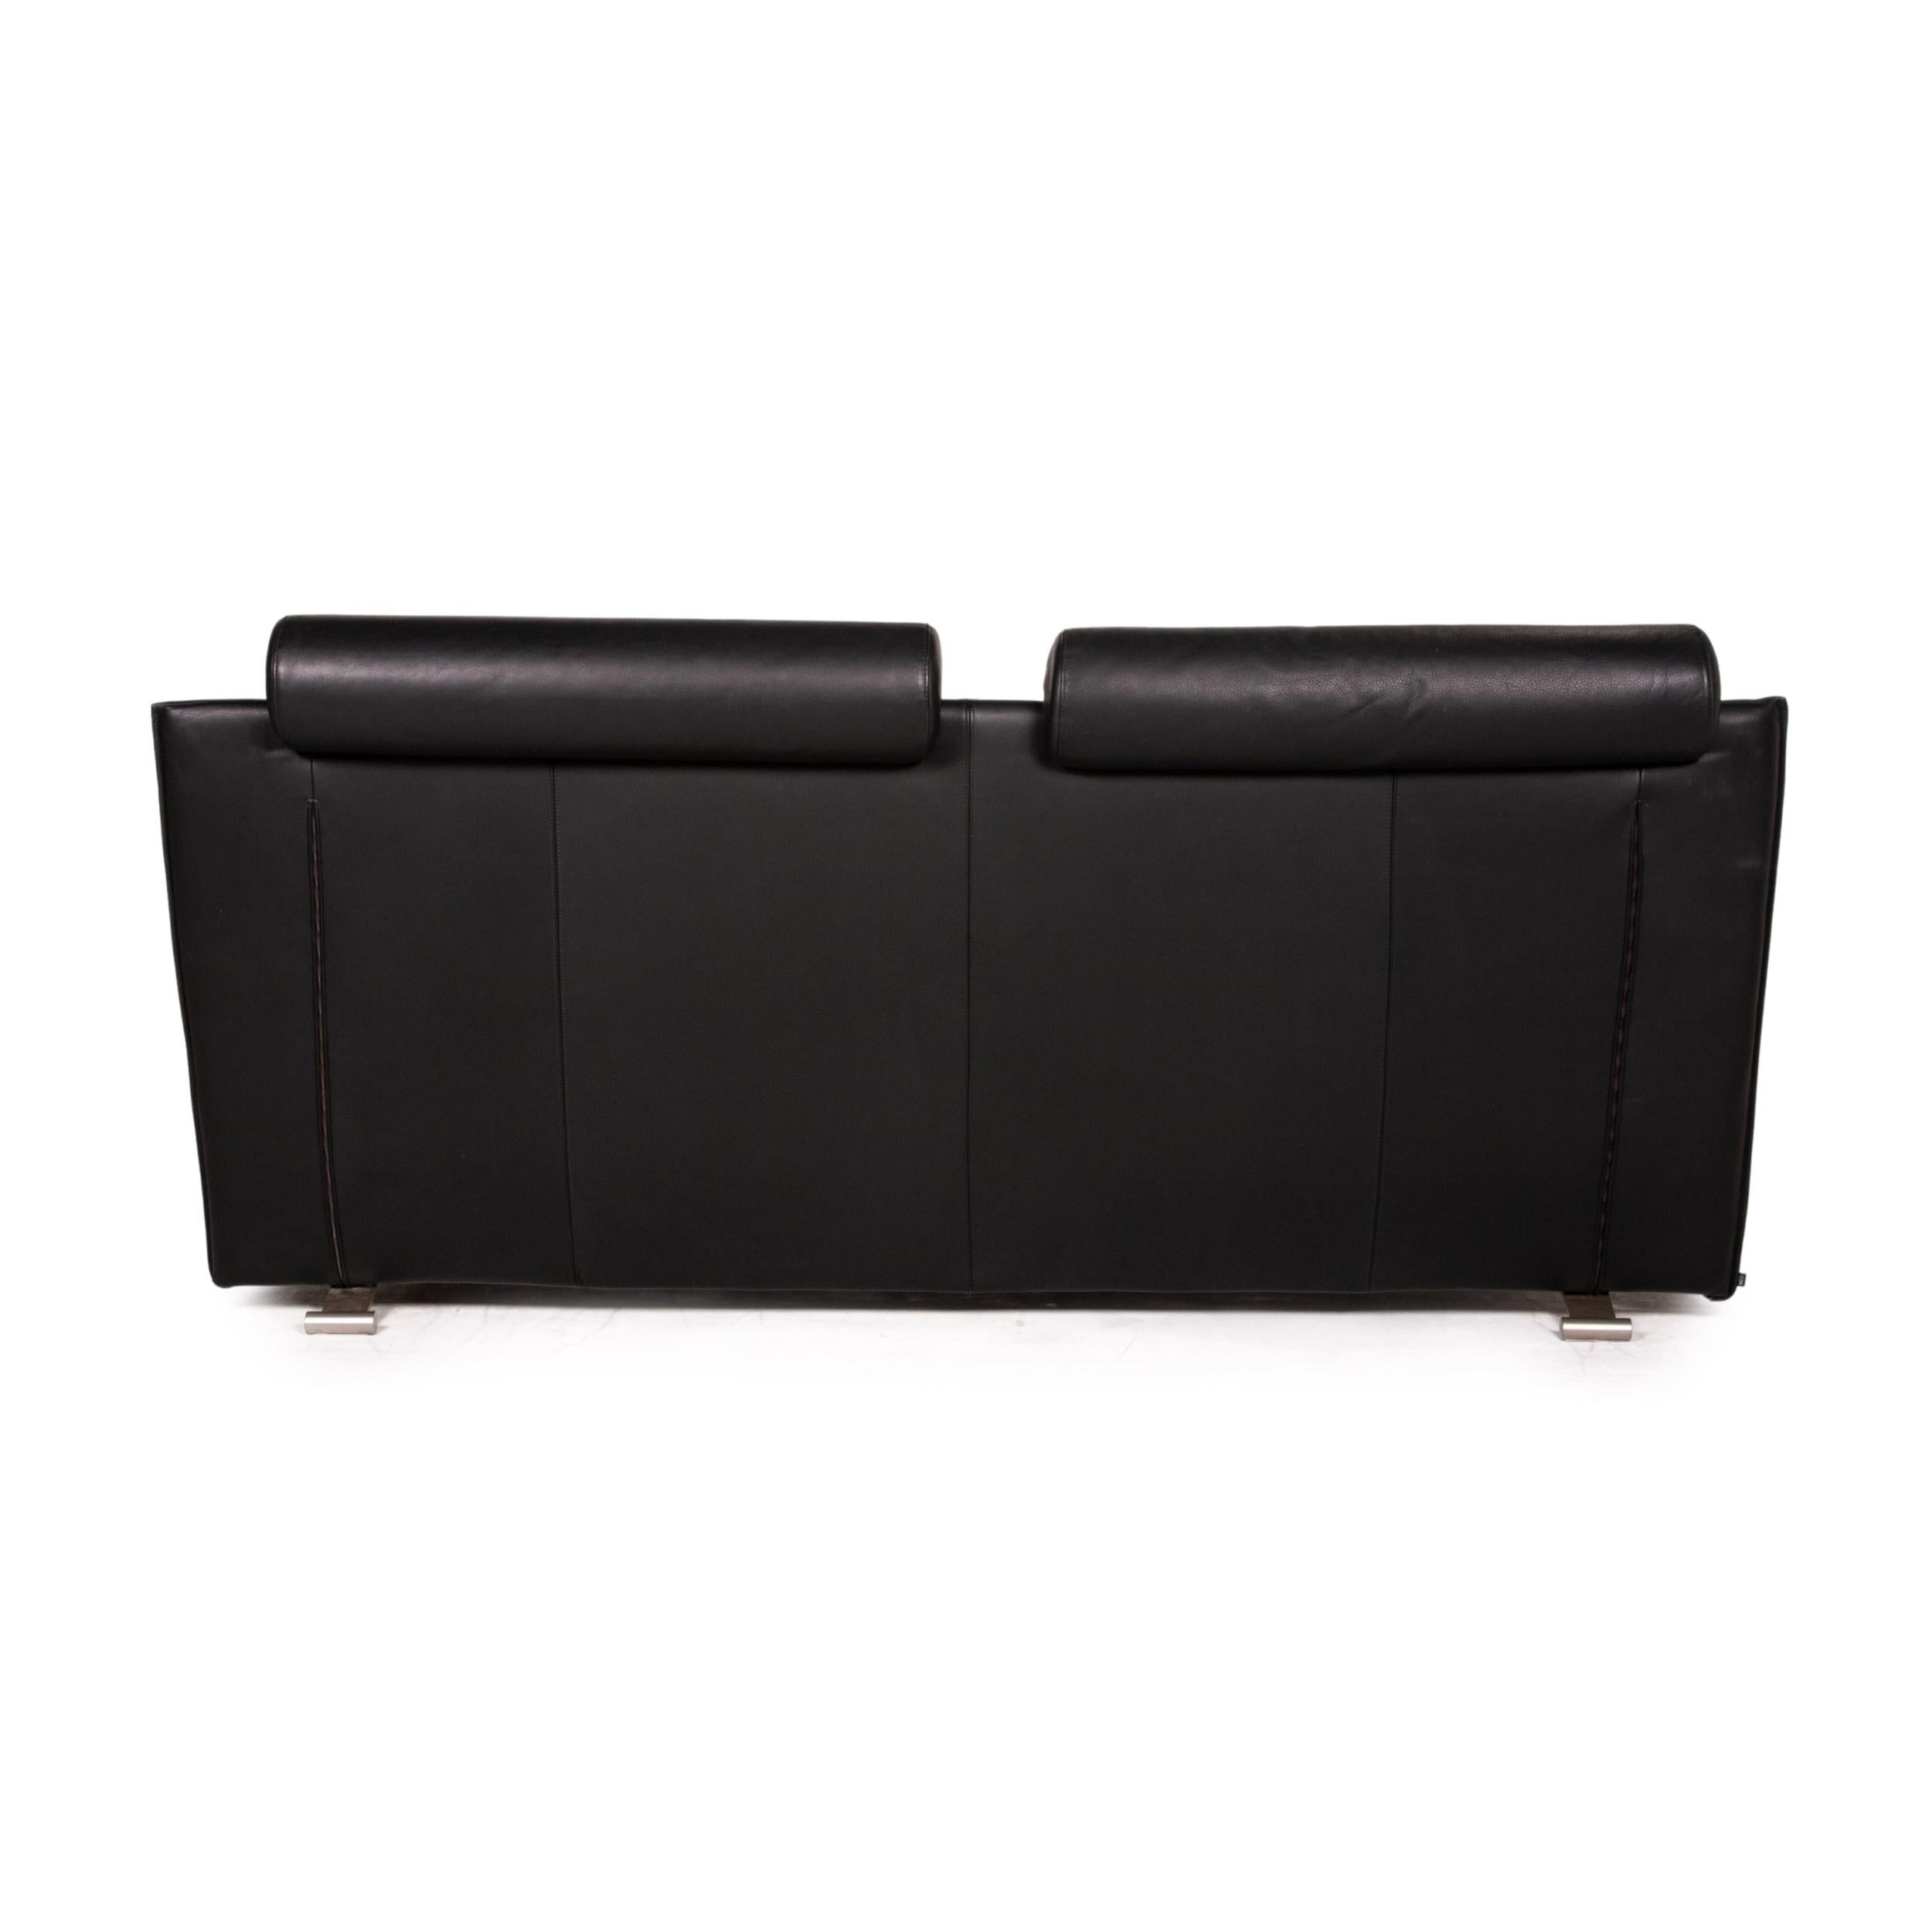 COR Sera Leather Sofa Set Black 2x Two-Seater Function For Sale 5